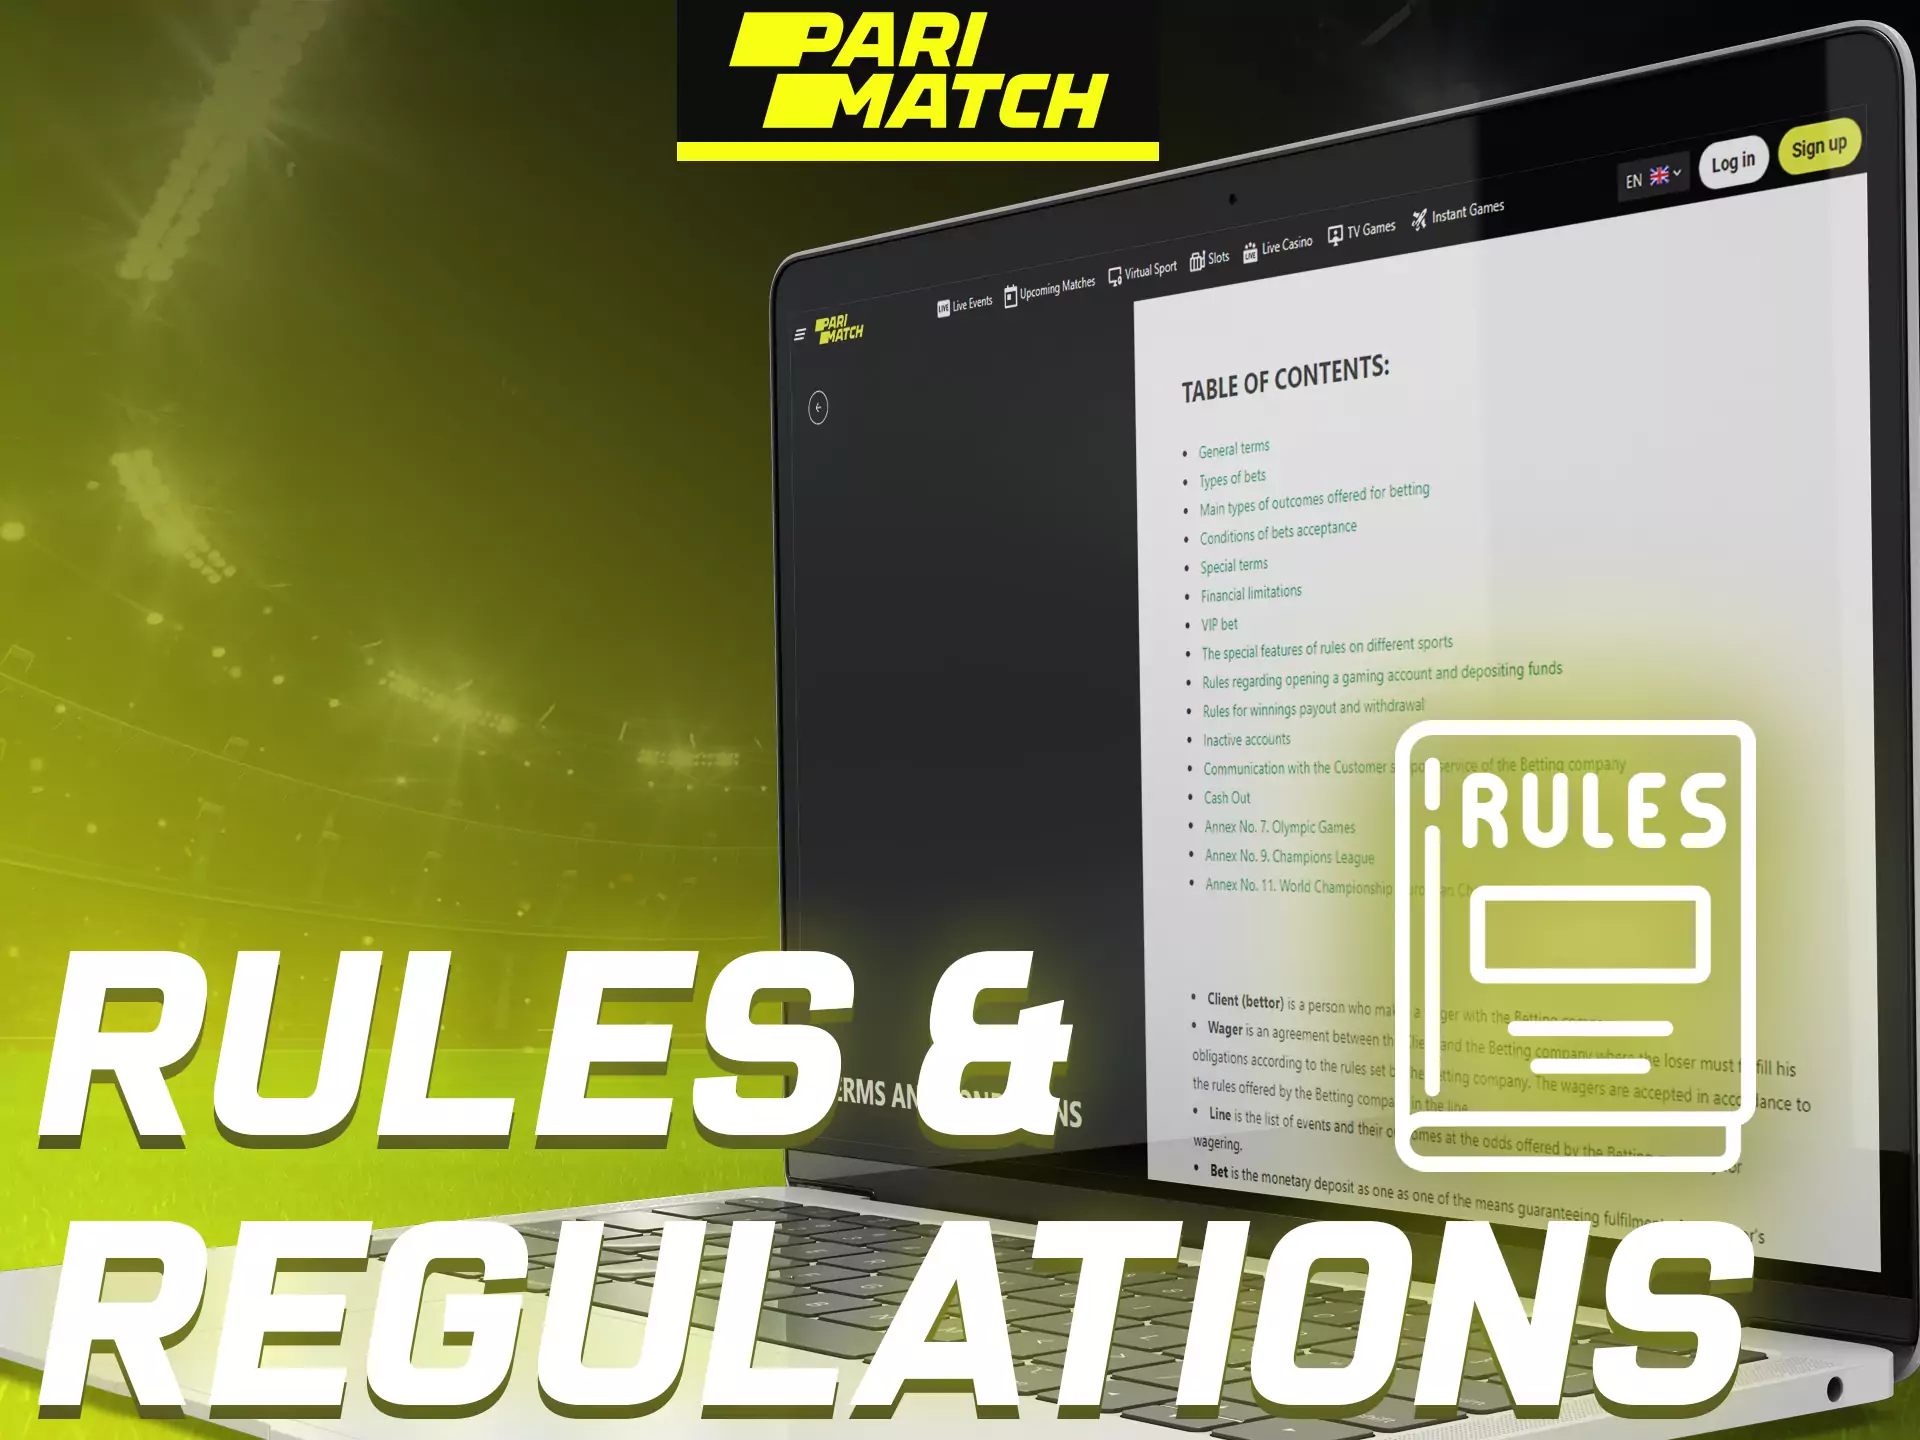 Follow Parimatch betting rules and make your betting experience better.